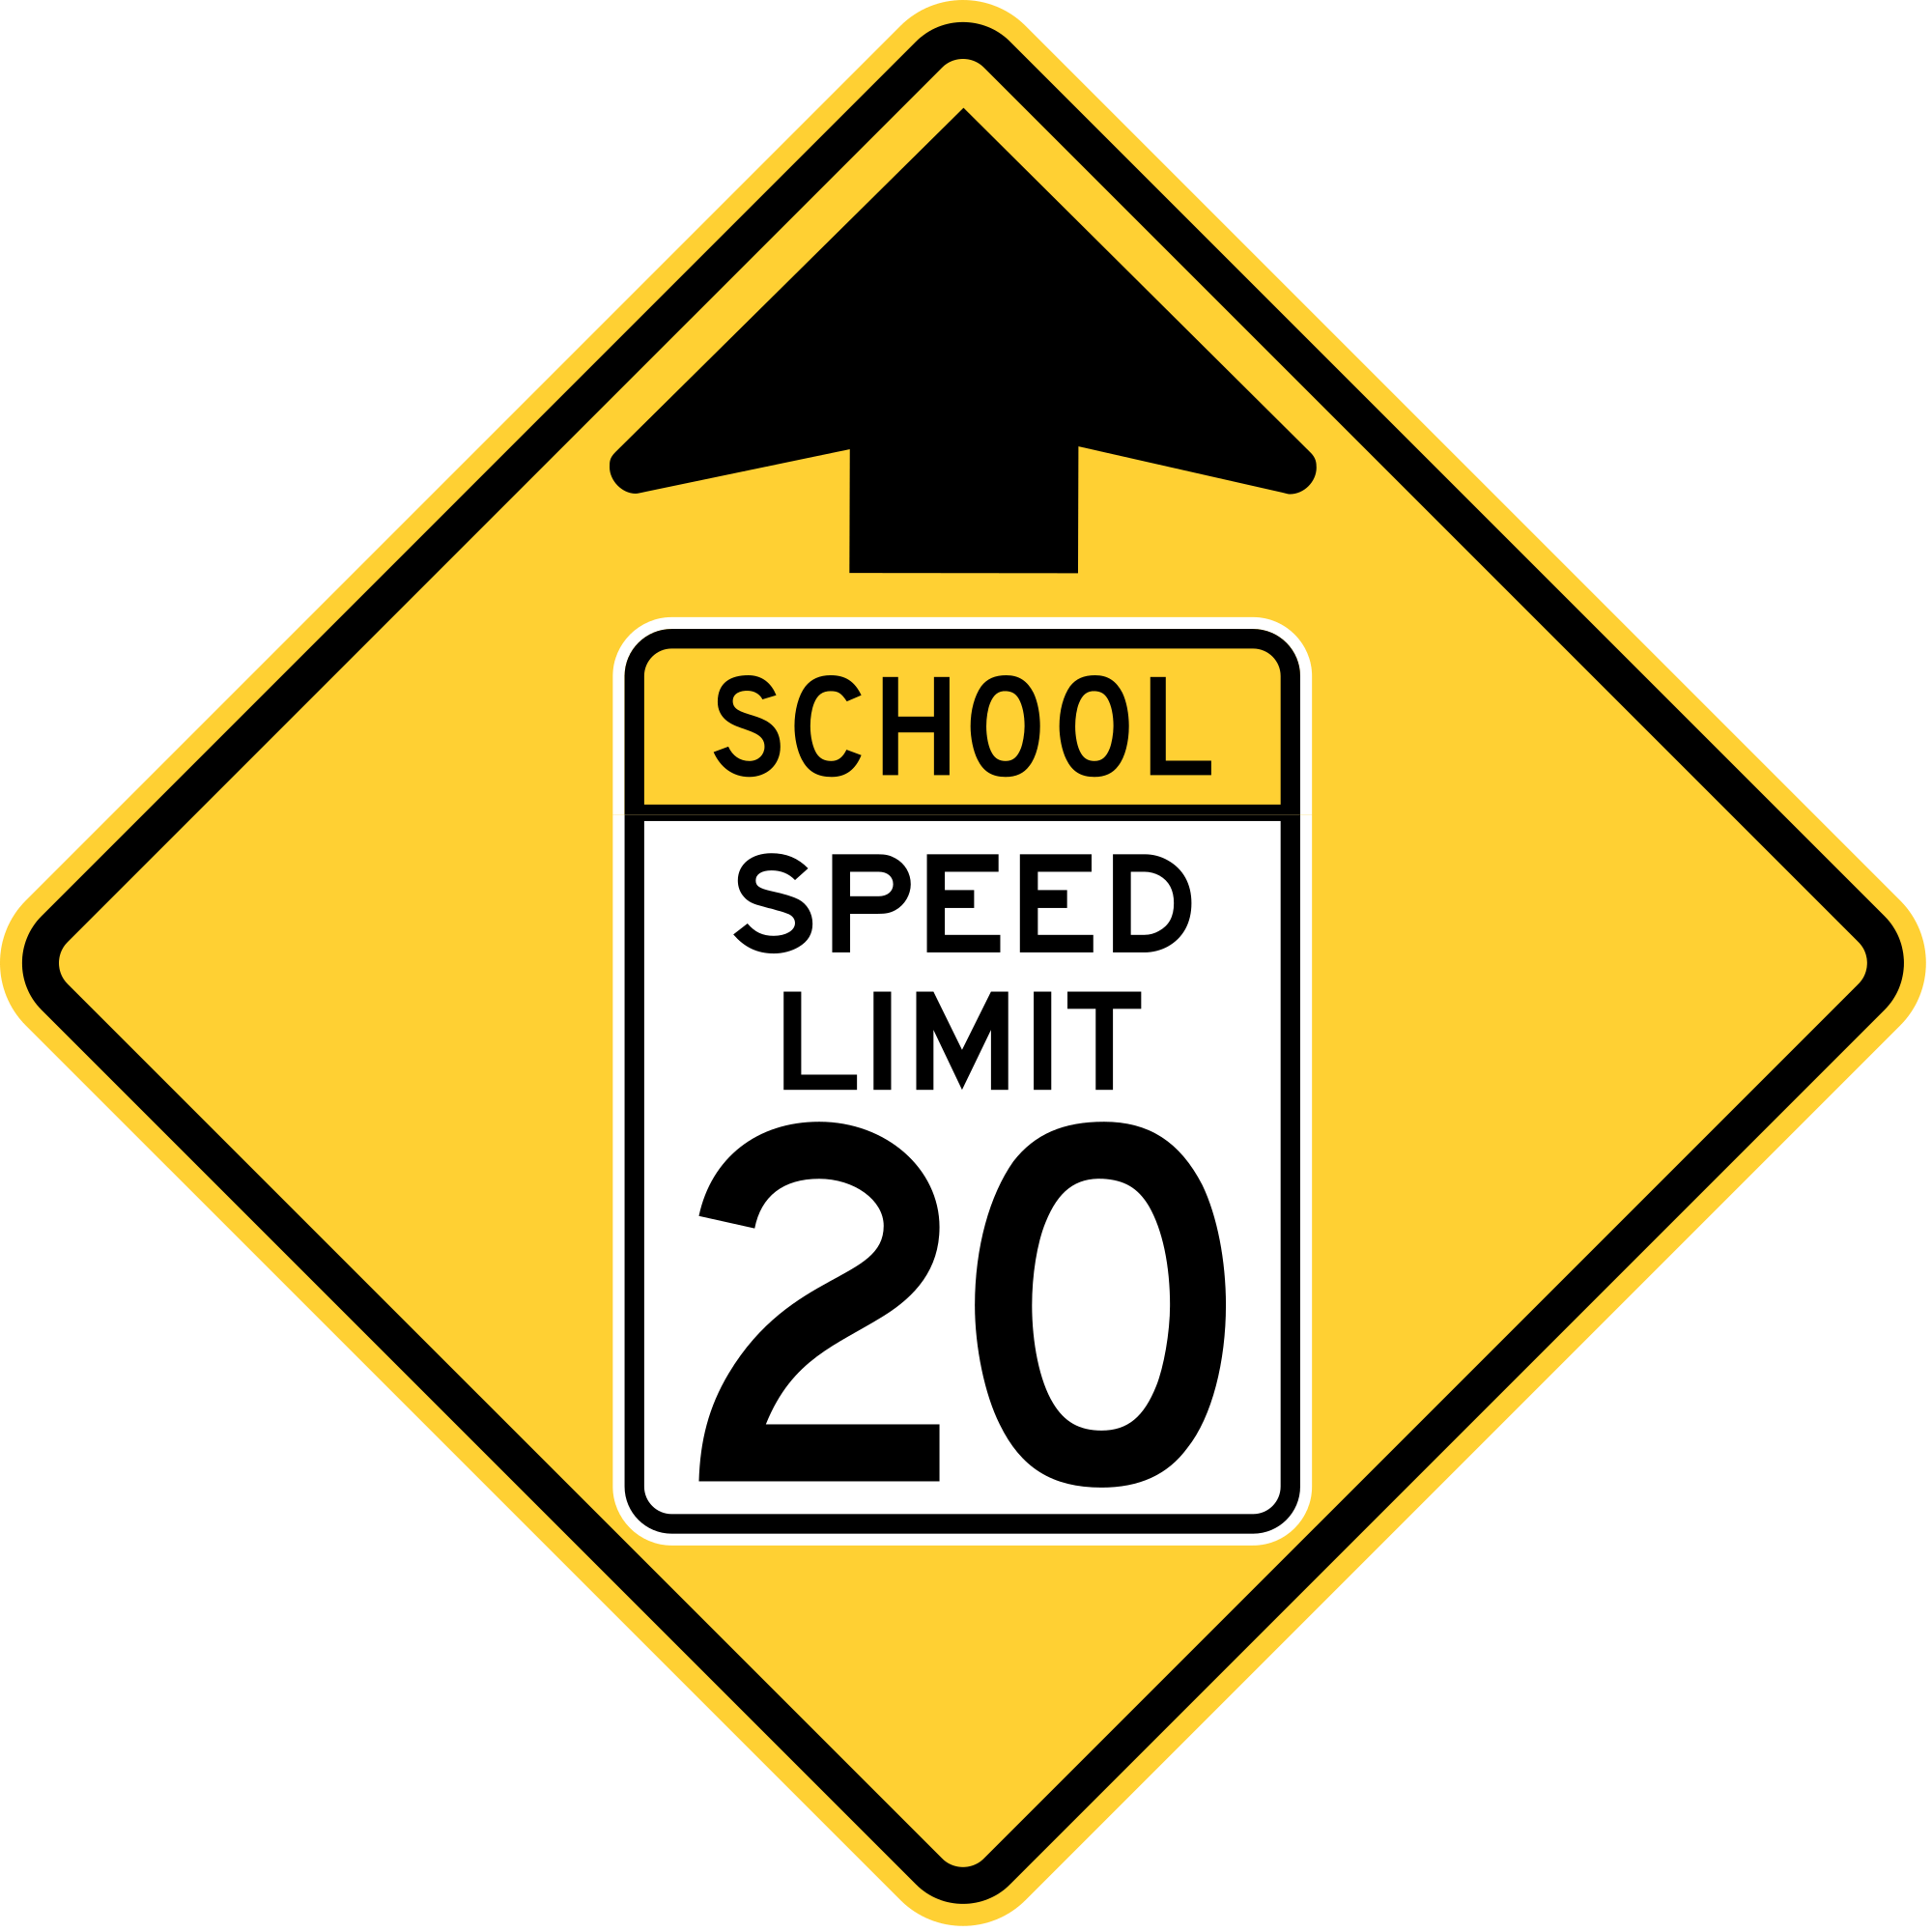 S4-5 Reduced Speed School Zone Ahead Sign